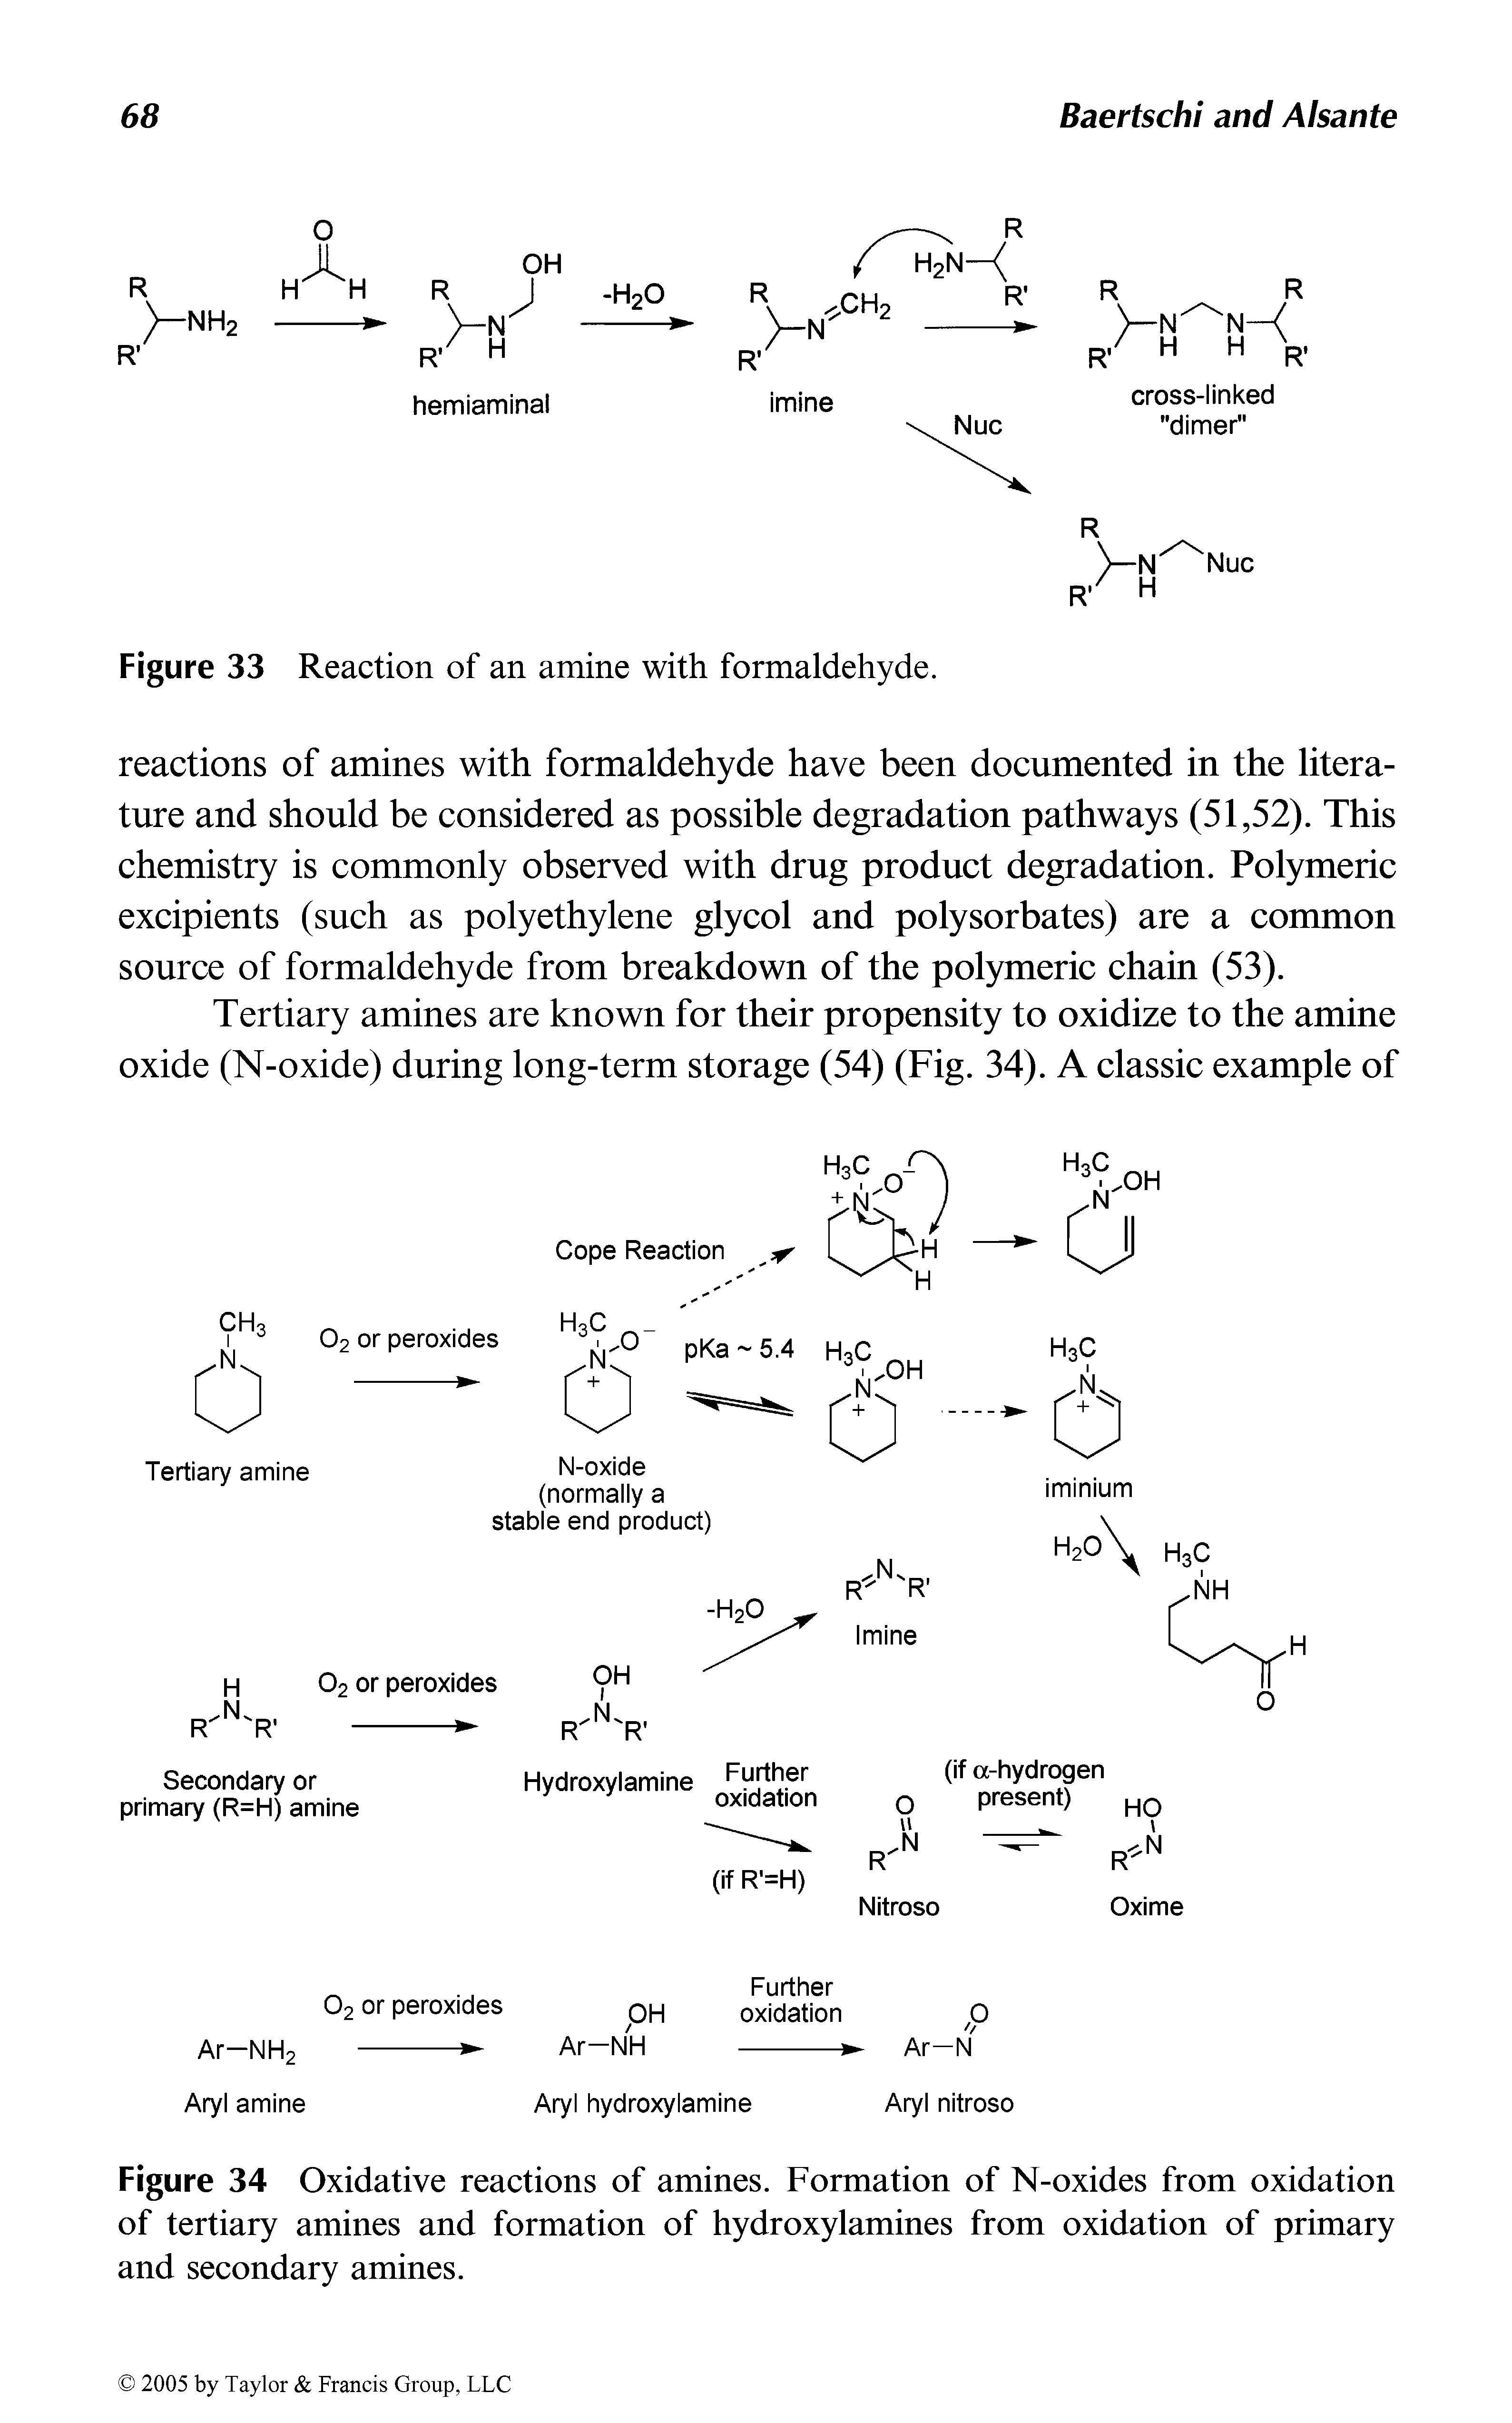 Figure 34 Oxidative reactions of amines. Formation of N-oxides from oxidation of tertiary amines and formation of hydroxylamines from oxidation of primary and secondary amines.